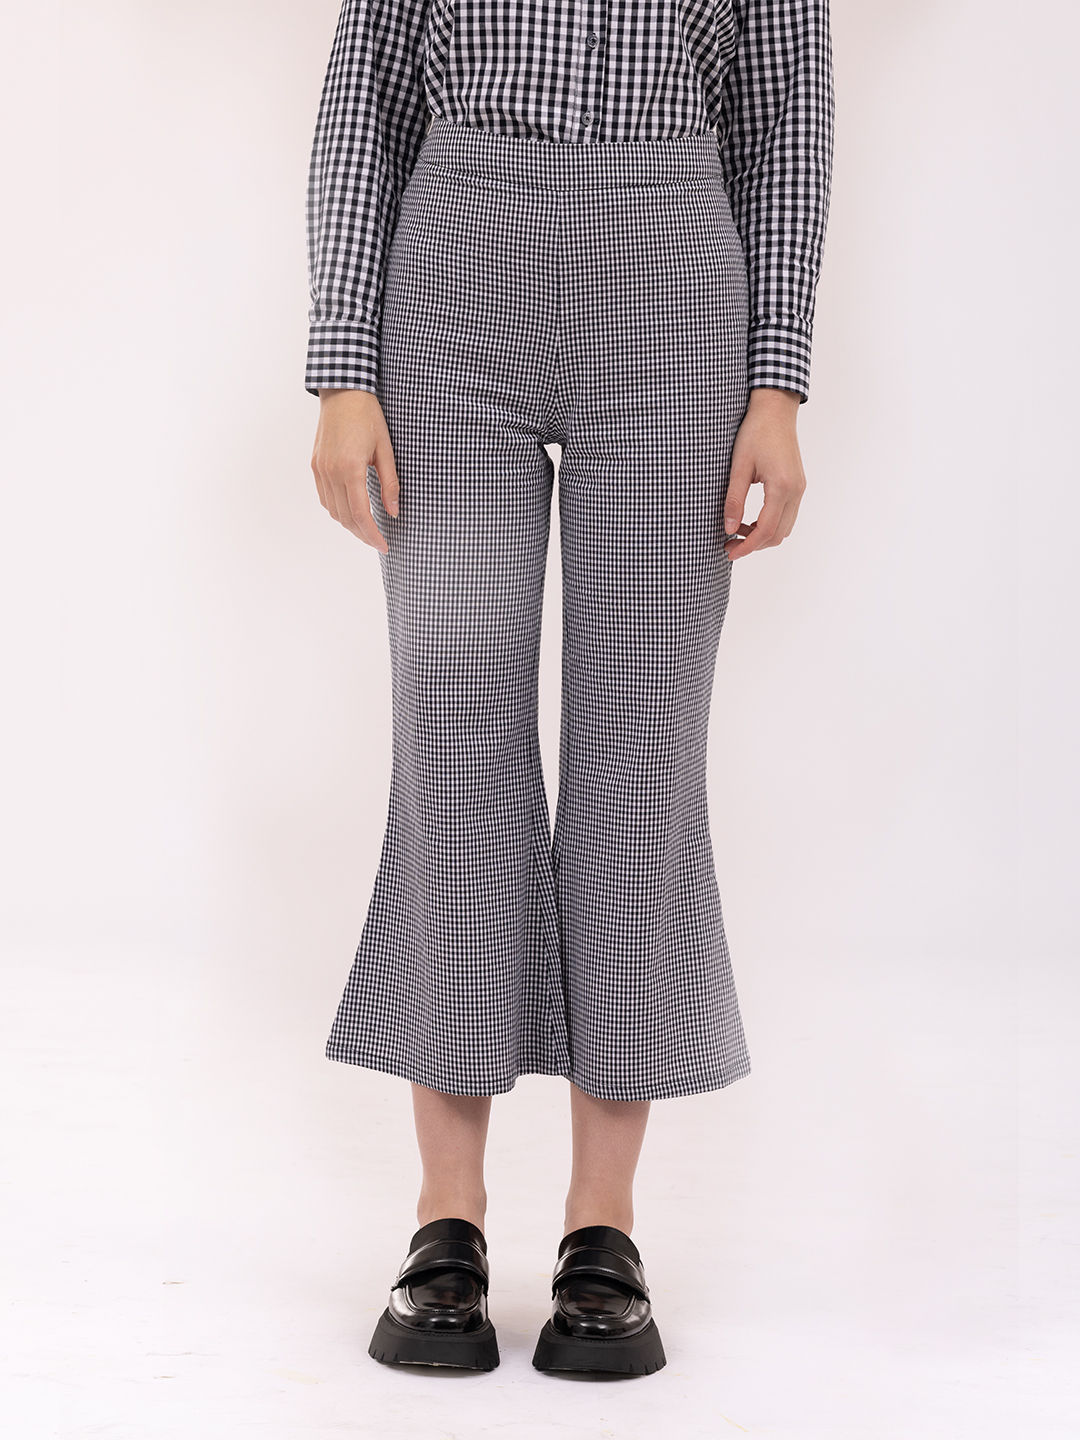 Buy calf length trousers ! stylized custom-made pull-on pant